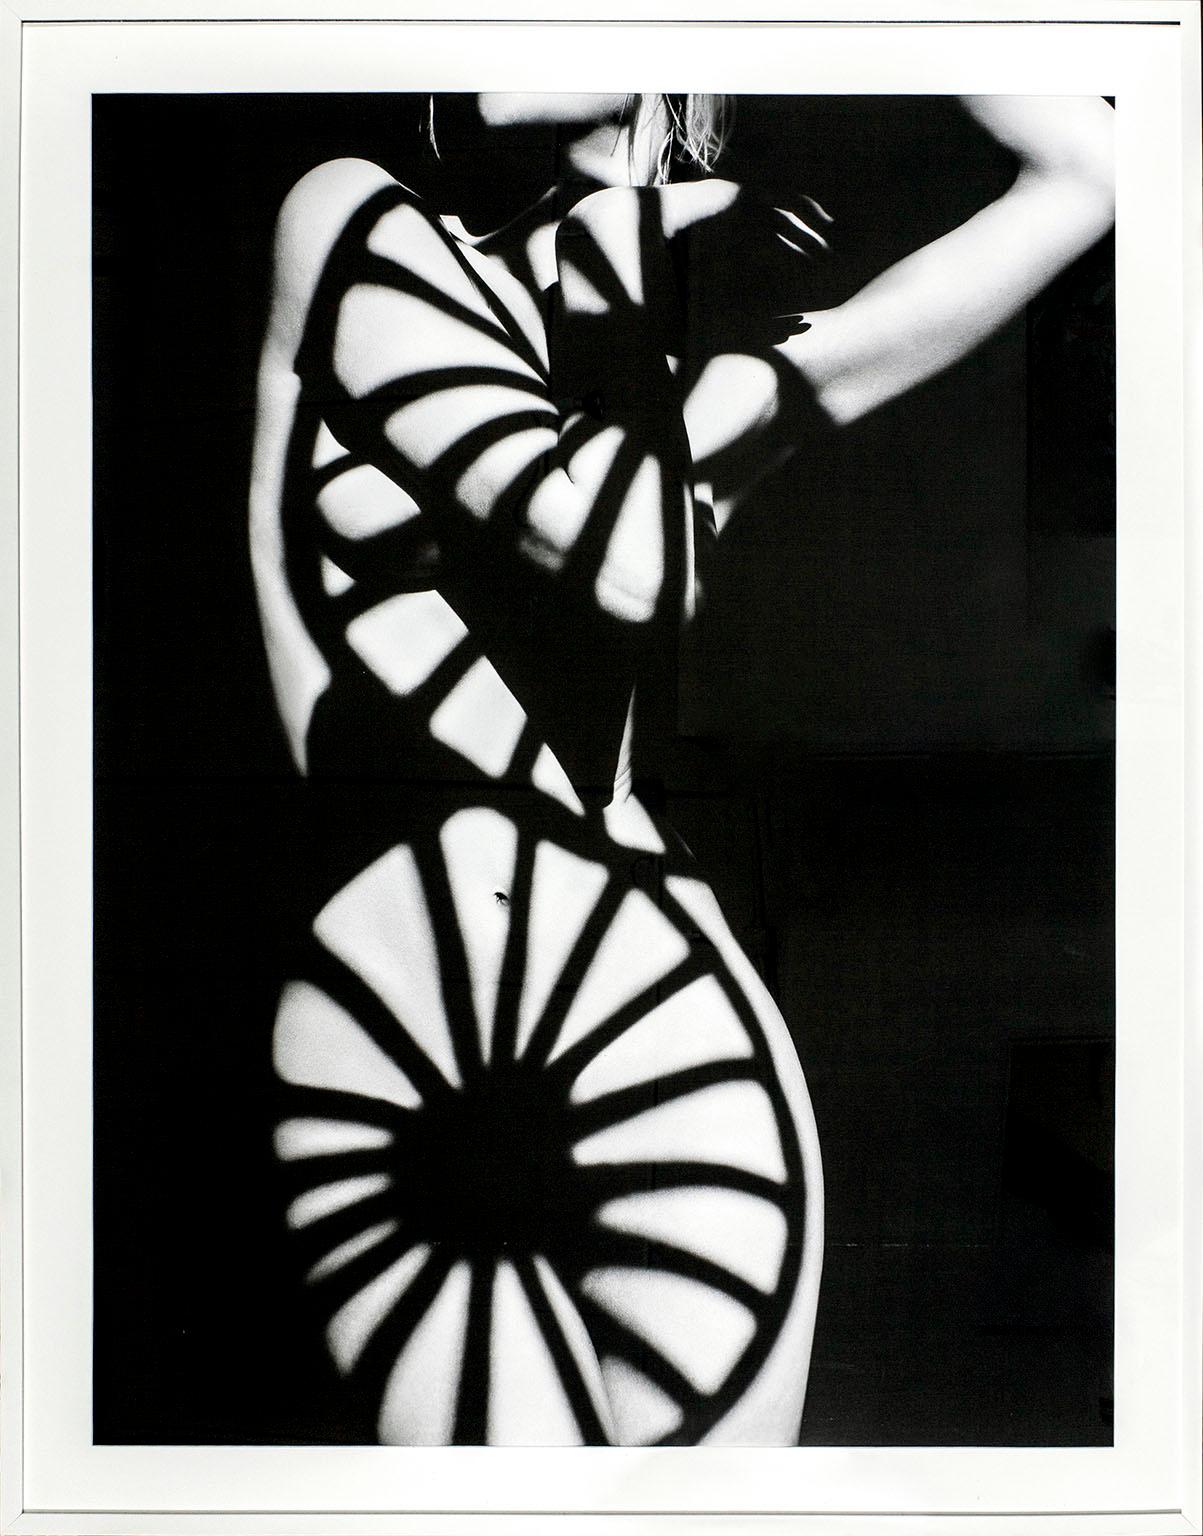 "Wagon Wheel" acrylic with fiber based paper by fashion photographer Greg Lotus. Black and white image of a female nude covered by perfectly positioned shadows cast by wagon wheels. From an edition of 25. Image size approximately 55 1/4 x 41 inches. 